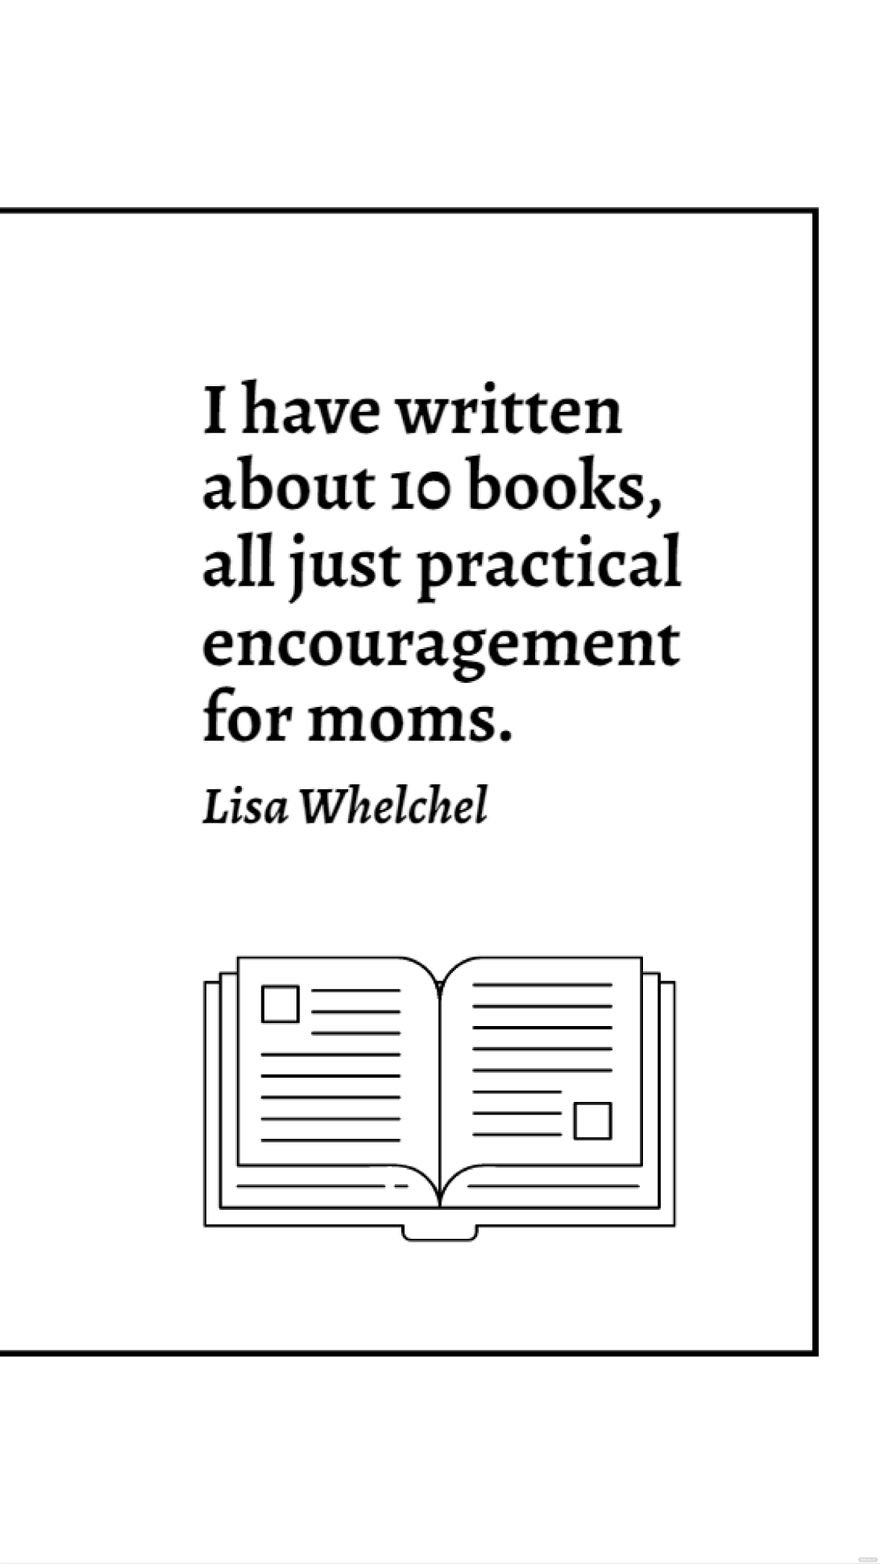 Free Lisa Whelchel - I have written about 10 books, all just practical encouragement for moms. Template